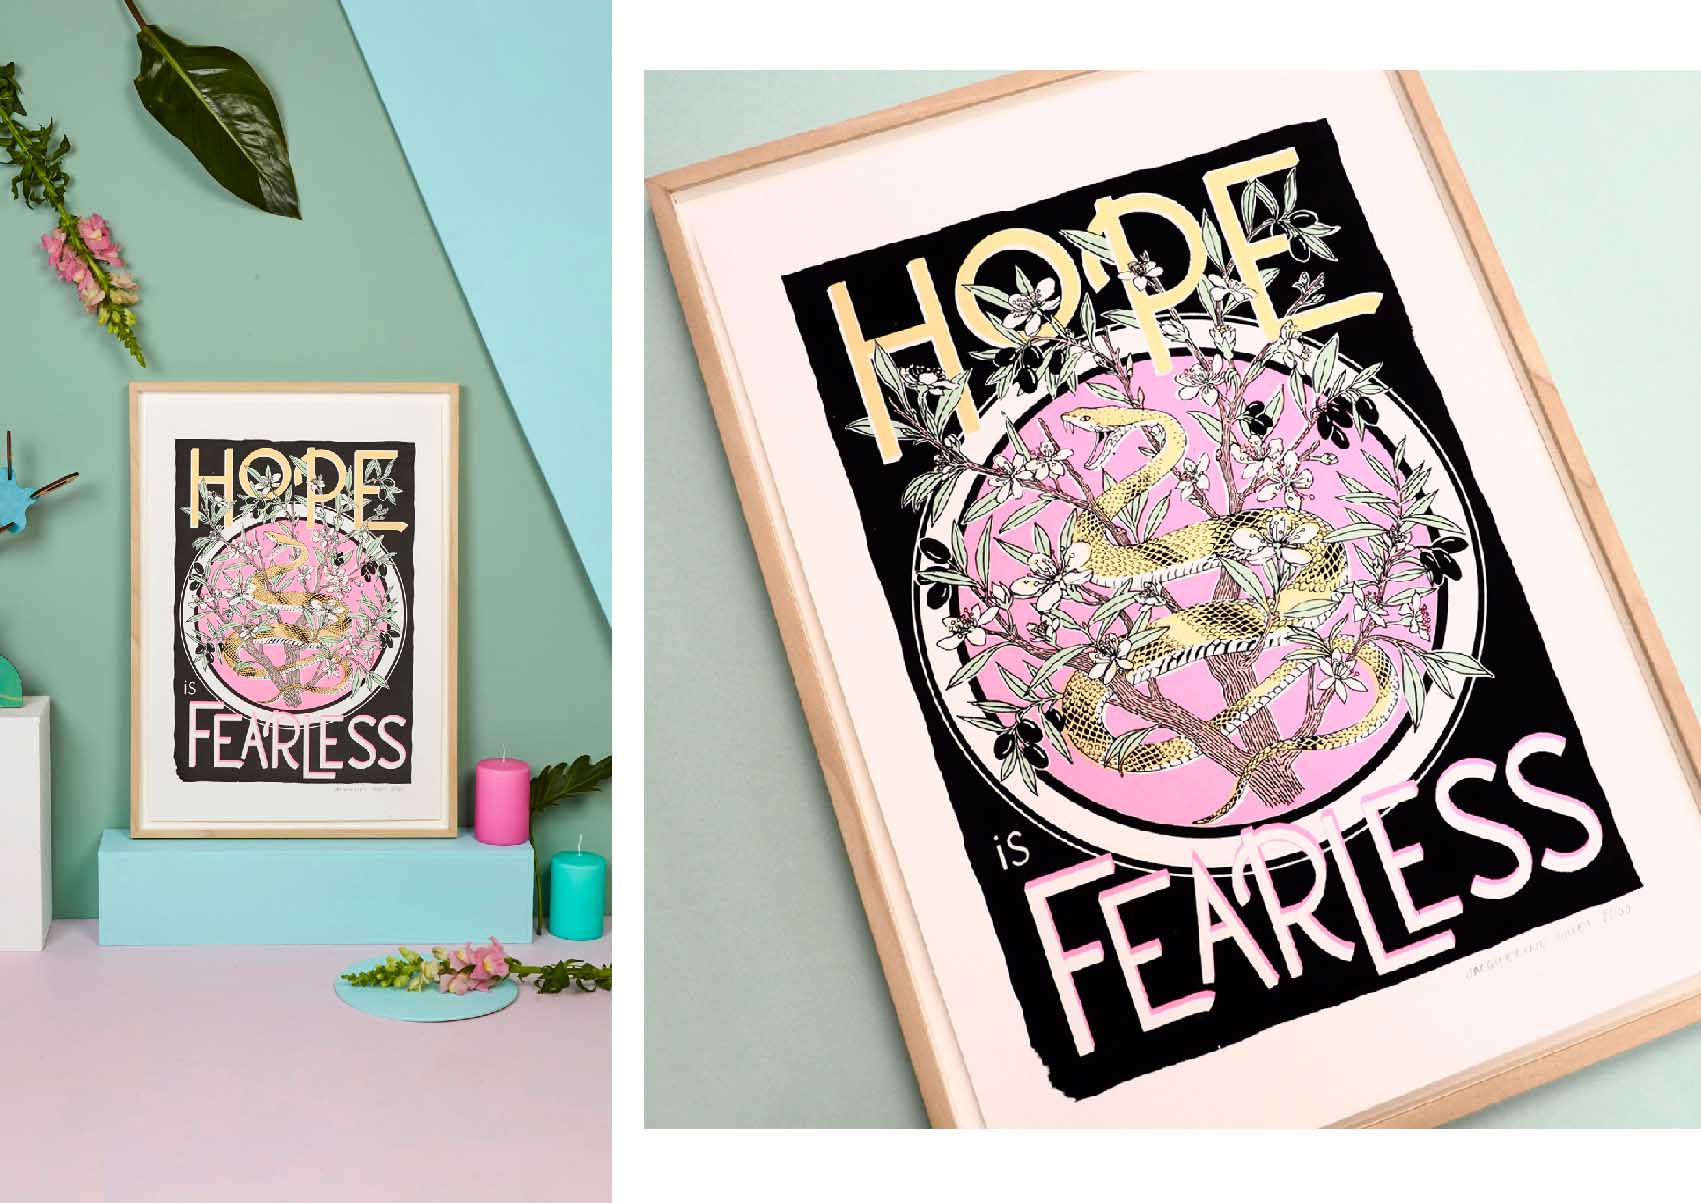 Hope-is-Fearless-Silk-screen-print-Jacqueline-colley copy.jpg